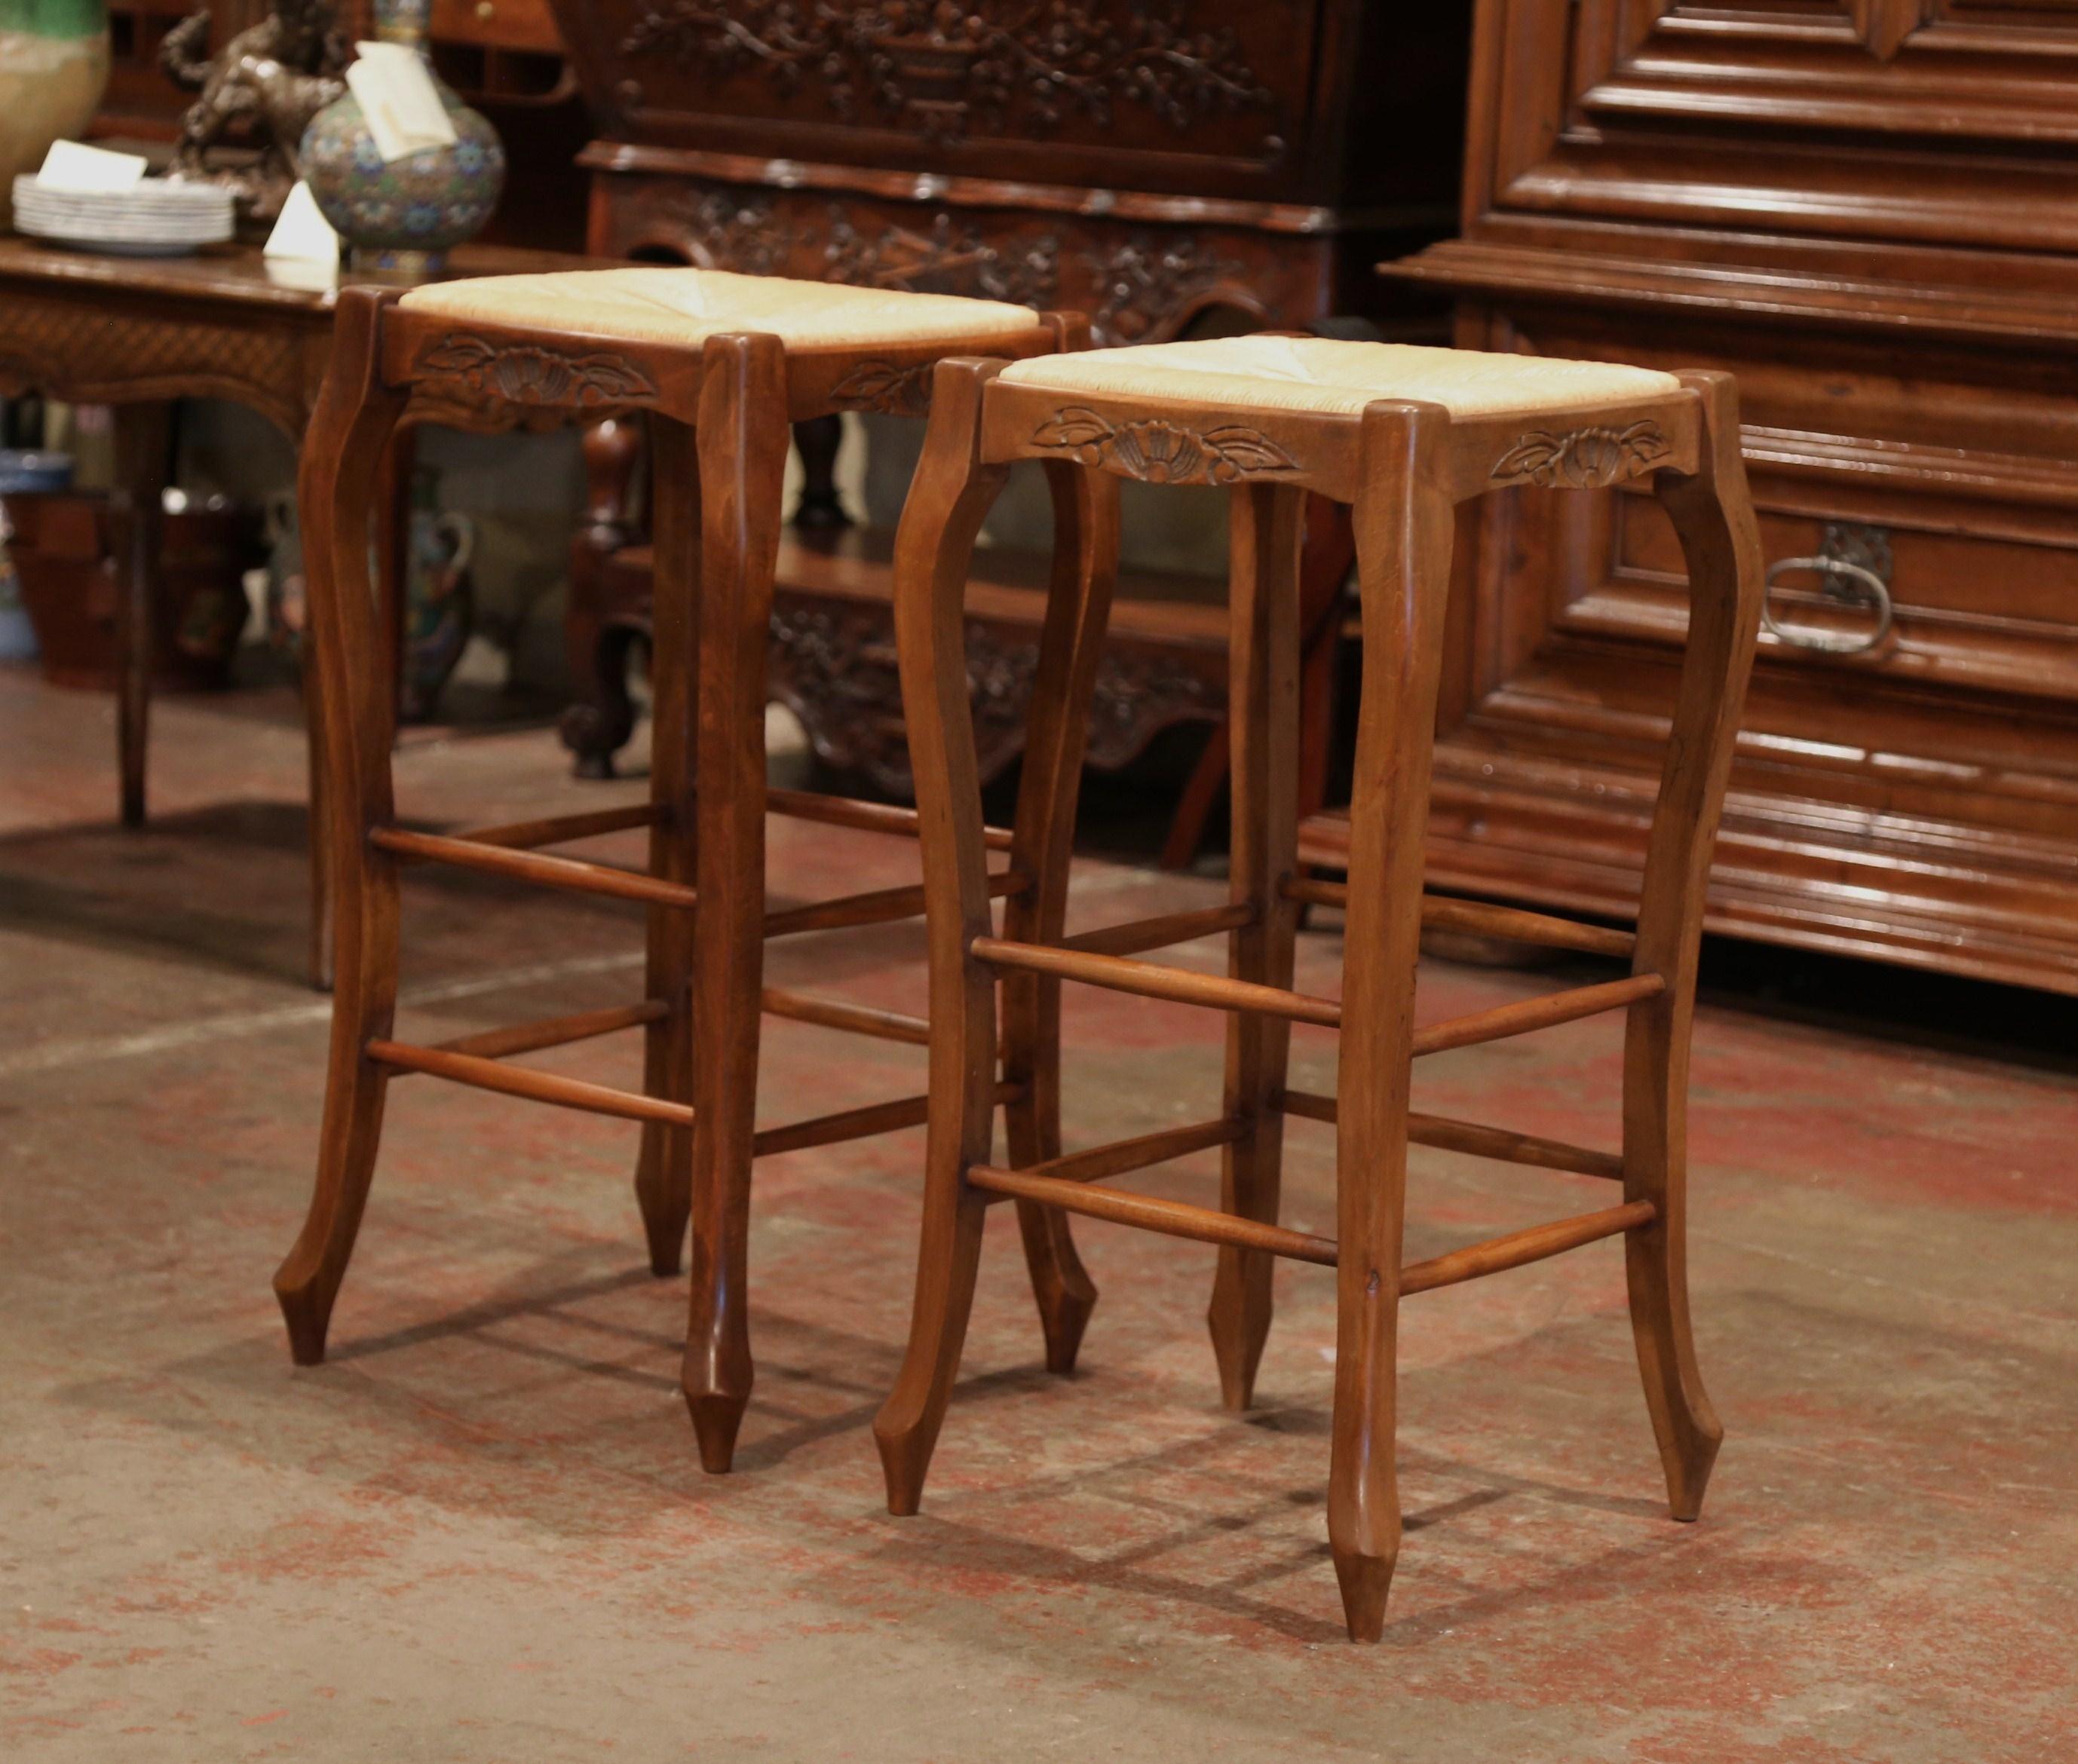 Place these bar stools around a kitchen island, crafted in France, the Classic, French stools are 30” in height; they feature a rush seat, four cabriole legs and are embellished with a carved shell motif with foliage decor under the seat. These